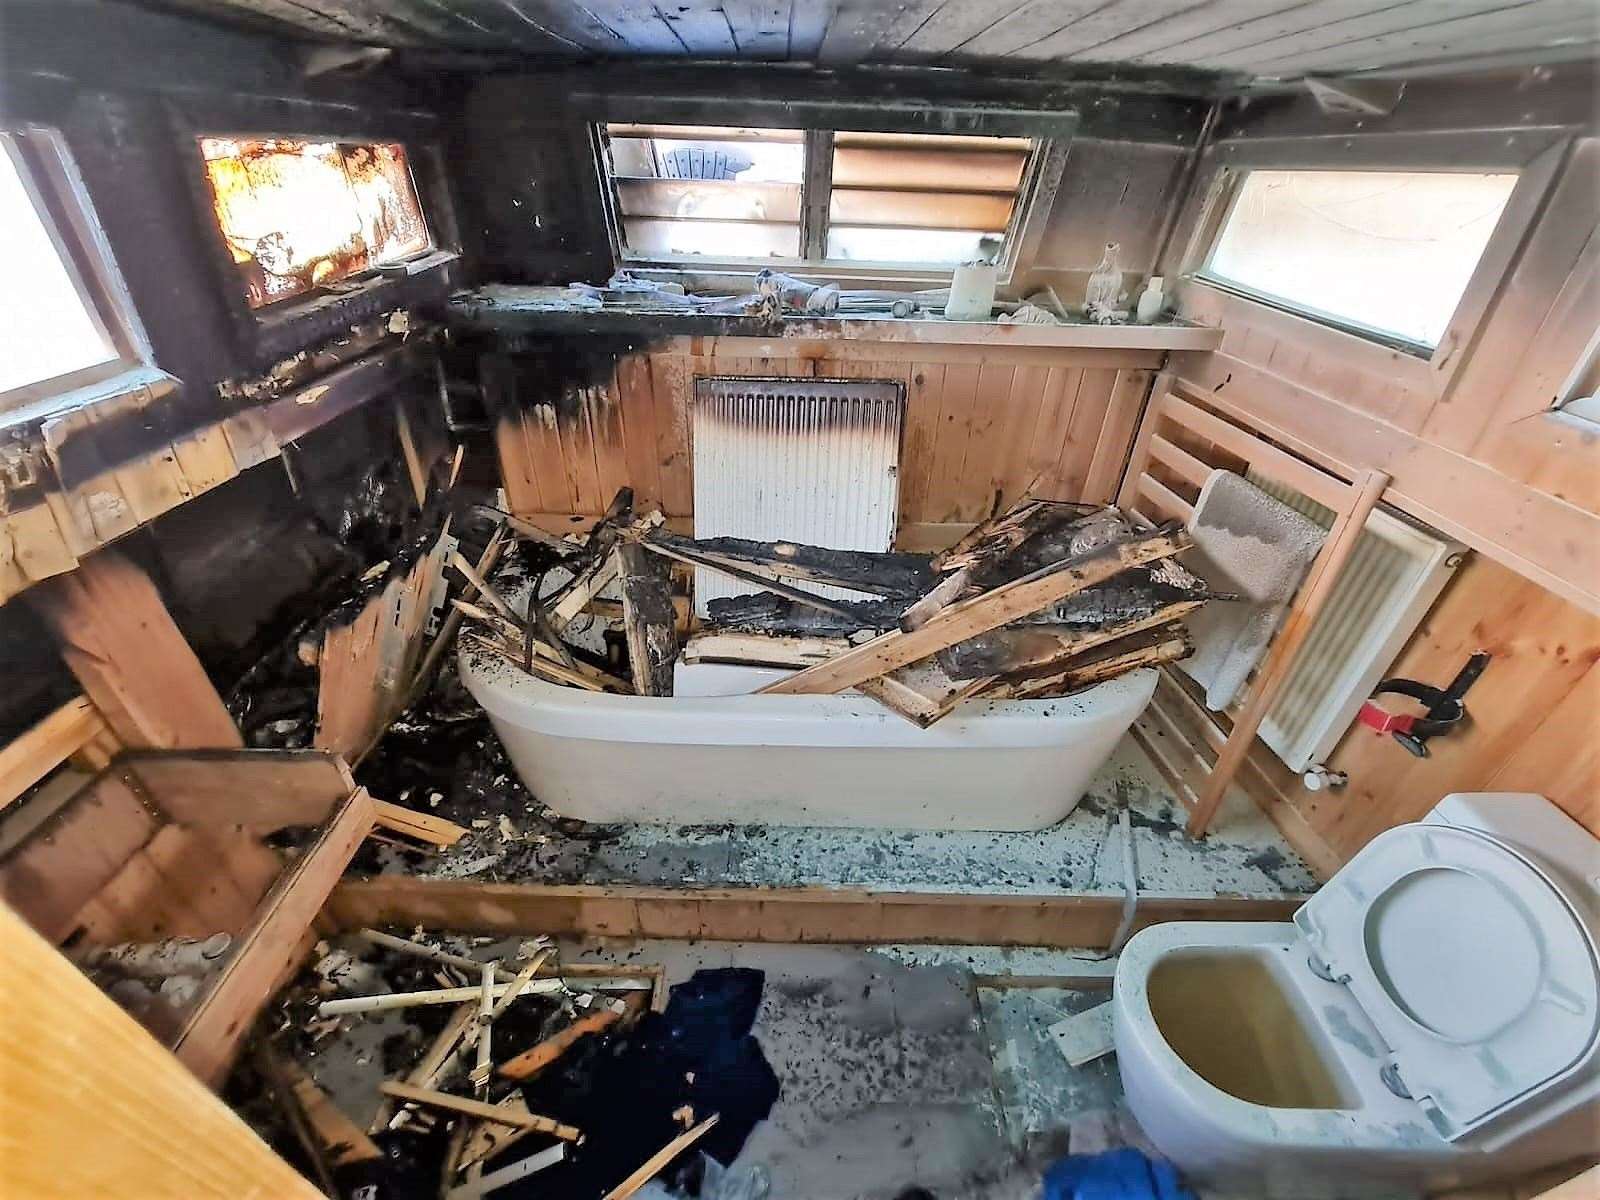 The boat was severely damaged in the fire. Picture: Sheerness RNLI (55840212)